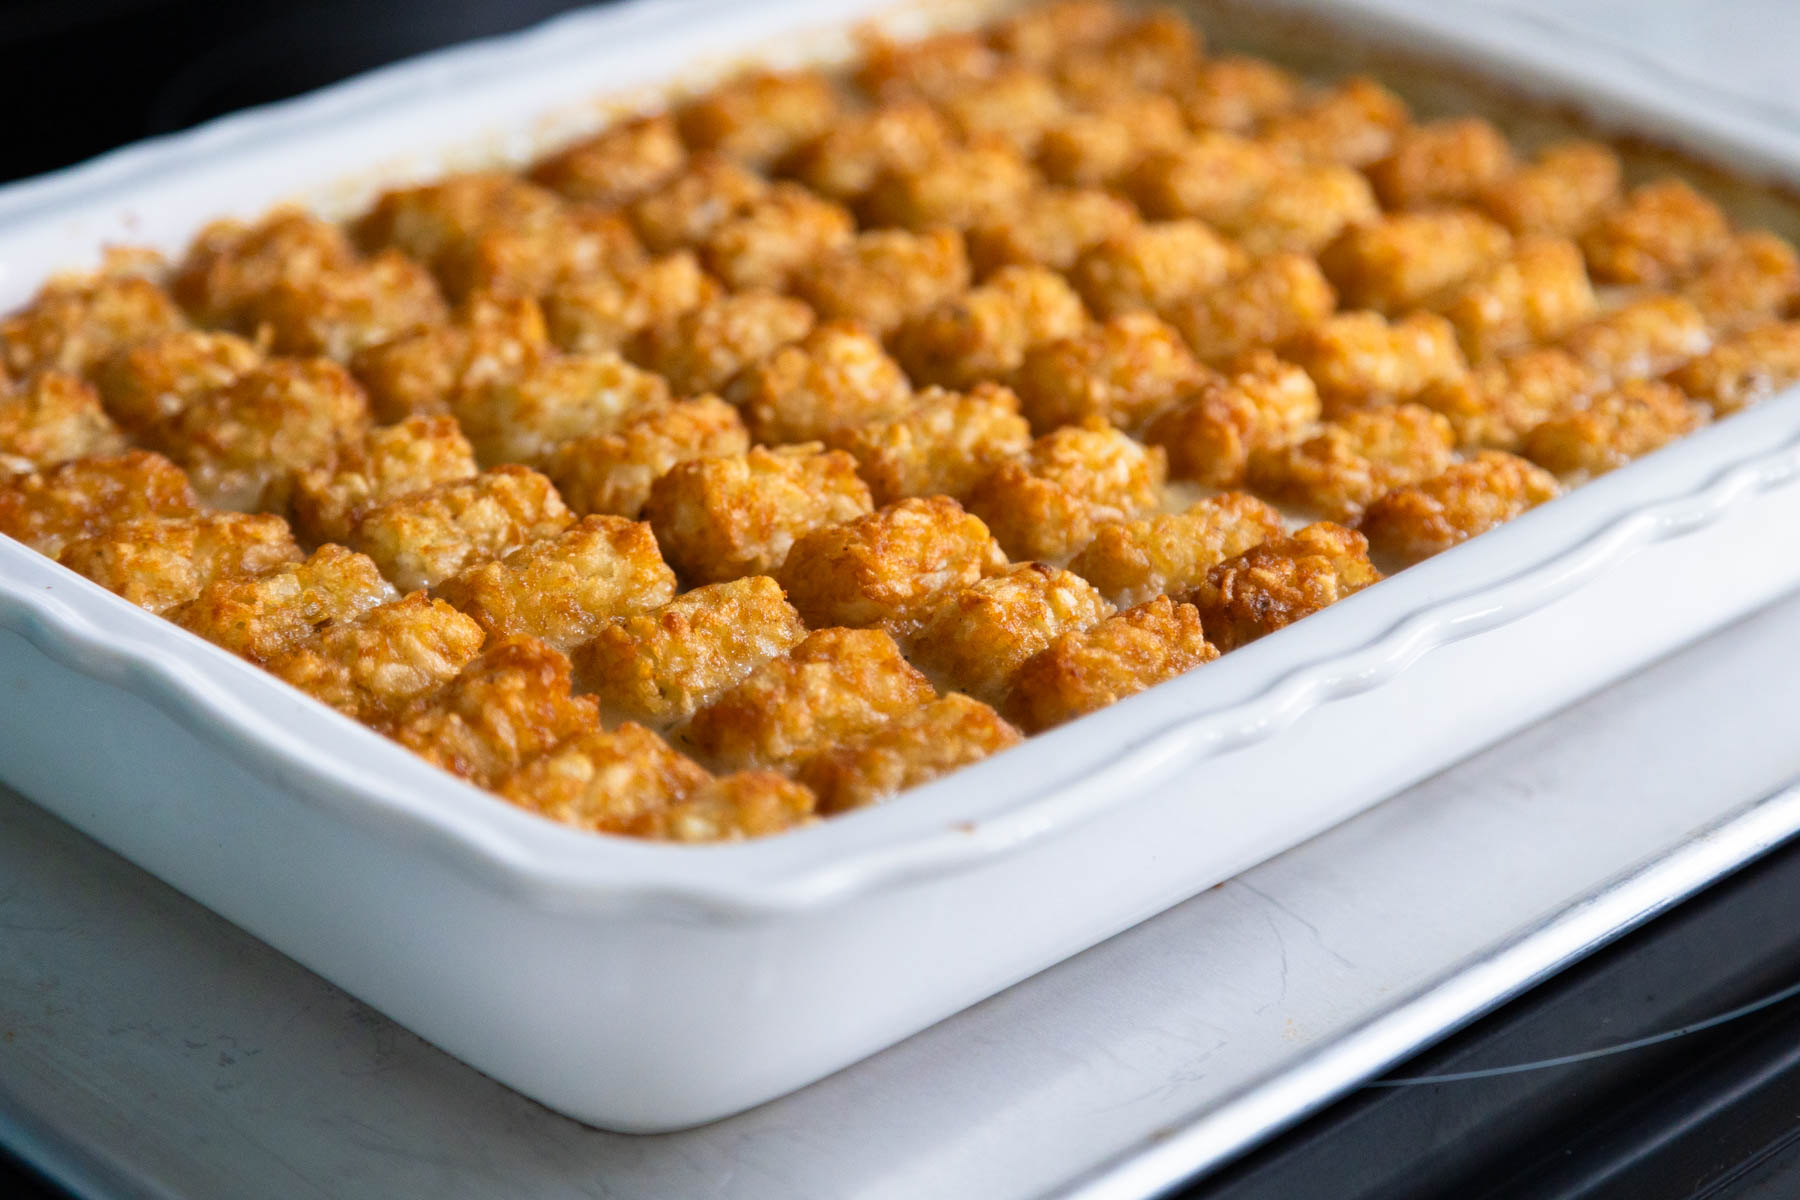 The assembled tater tot casserole is on a baking pan fresh out of the oven with golden brown tater tots on top.